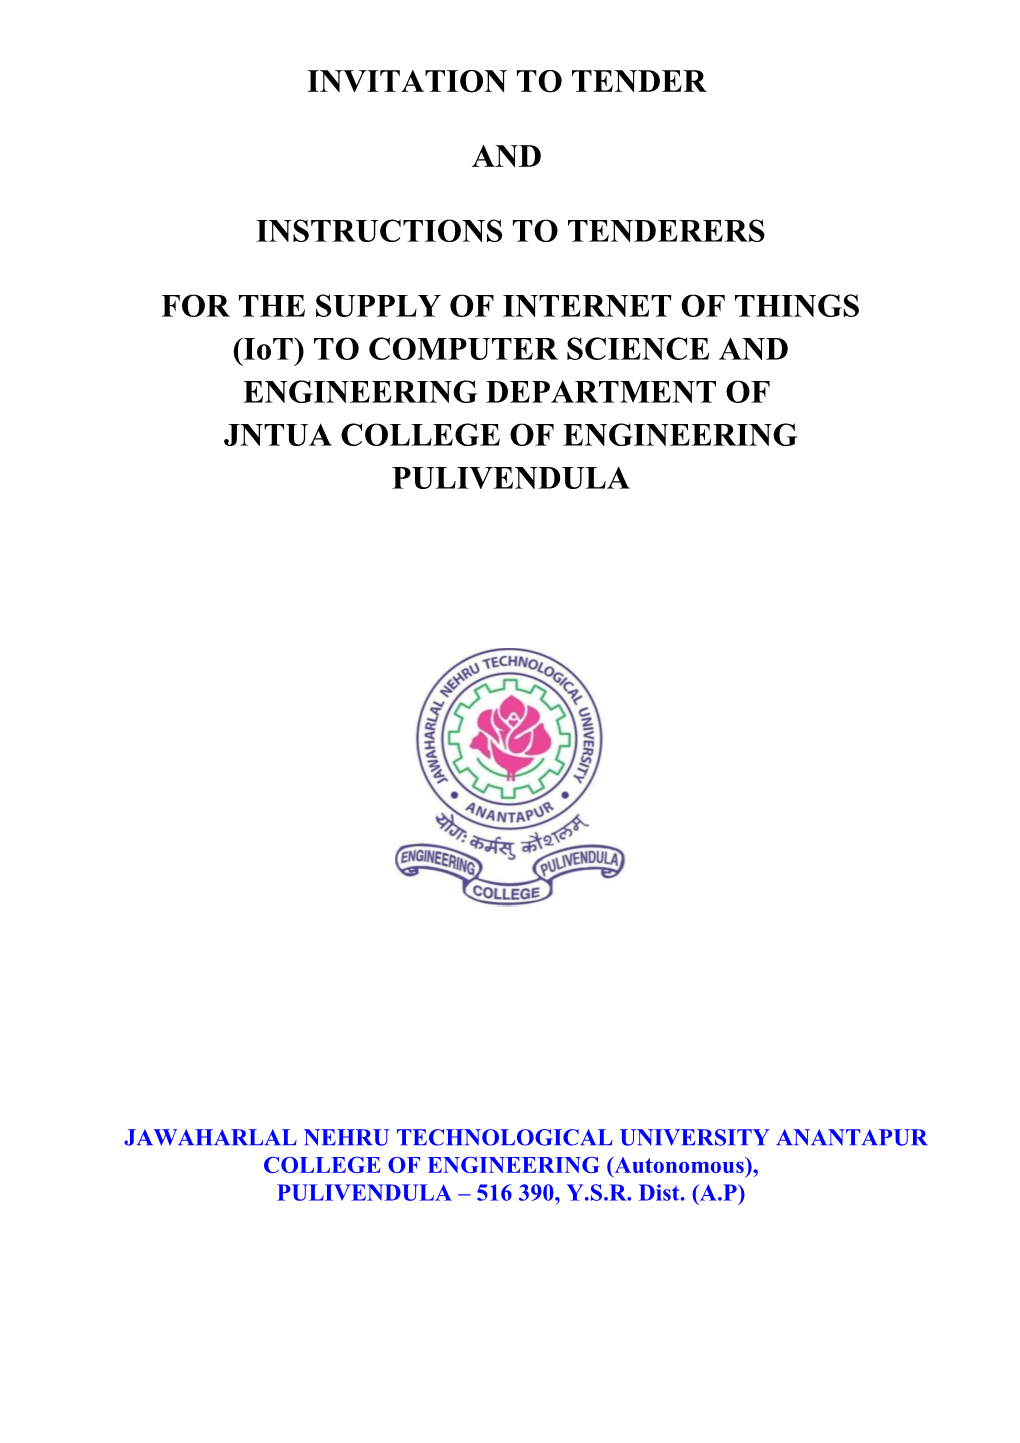 FOR the SUPPLY of INTERNET of THINGS (Iot) to COMPUTER SCIENCE and ENGINEERING DEPARTMENT OF